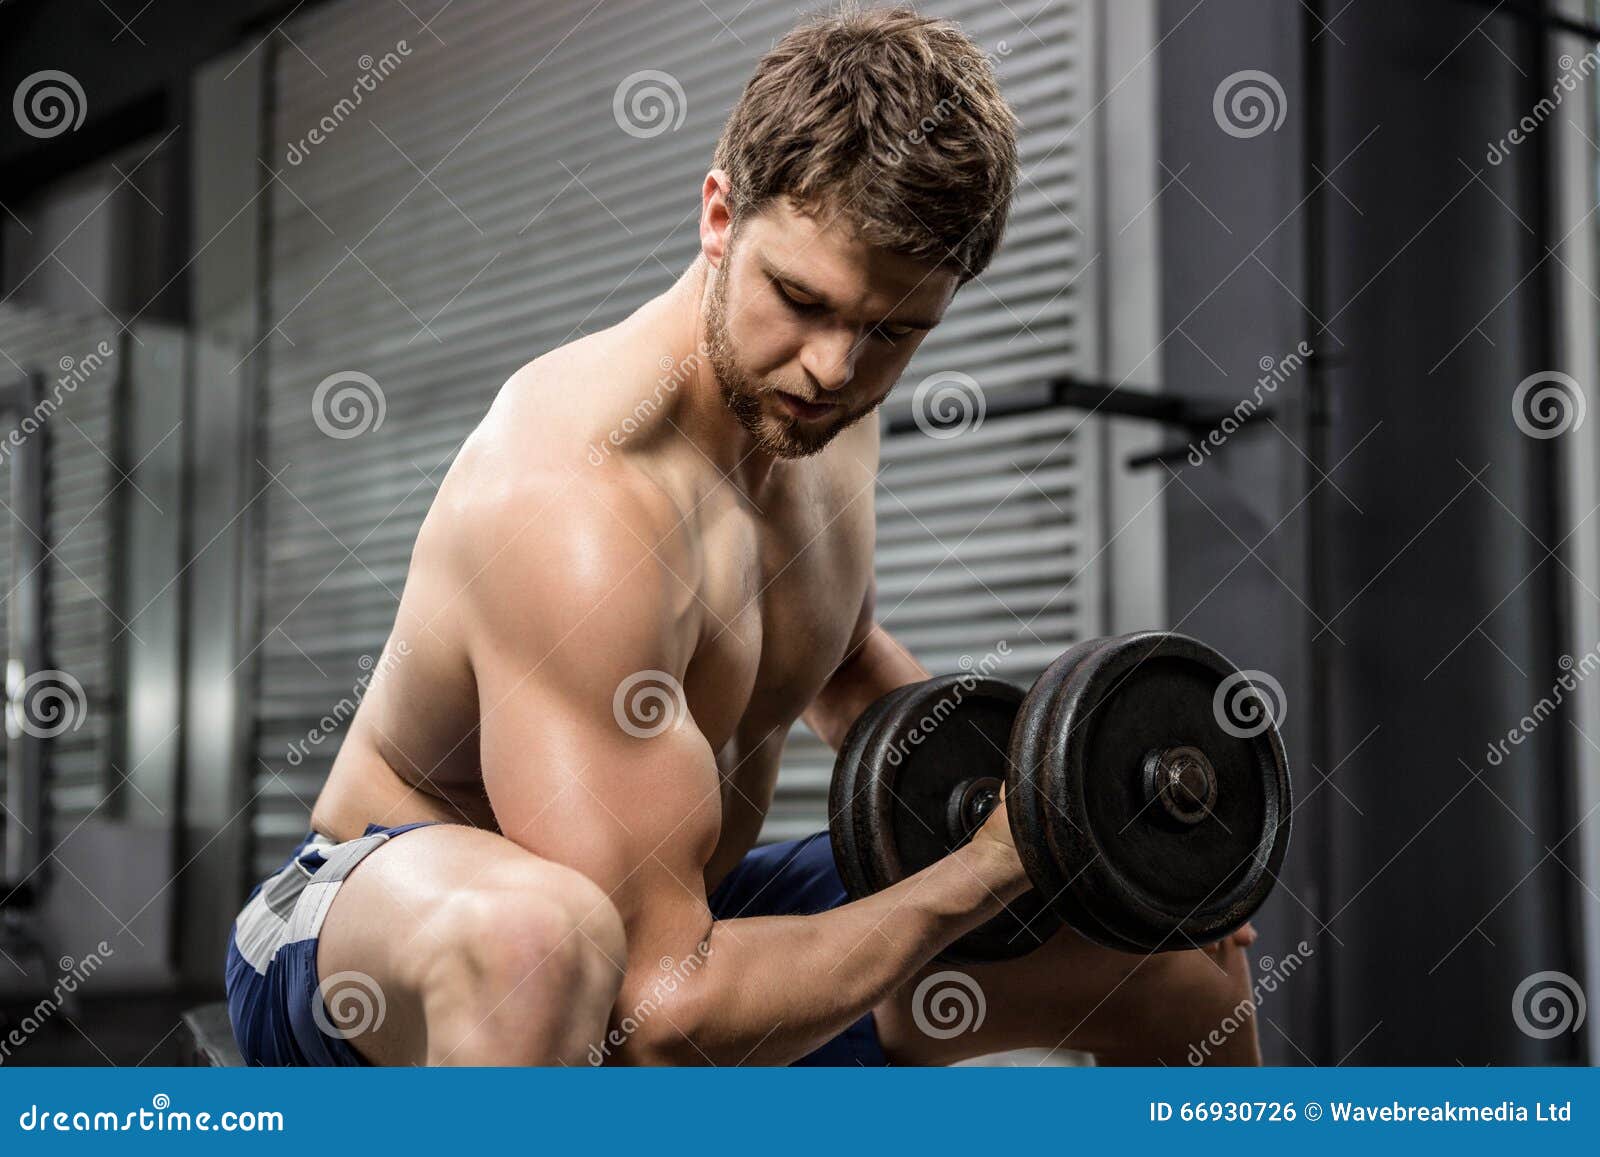 Shirtless Man Lifting Heavy Dumbbell On Bench Stock Photo Image Of